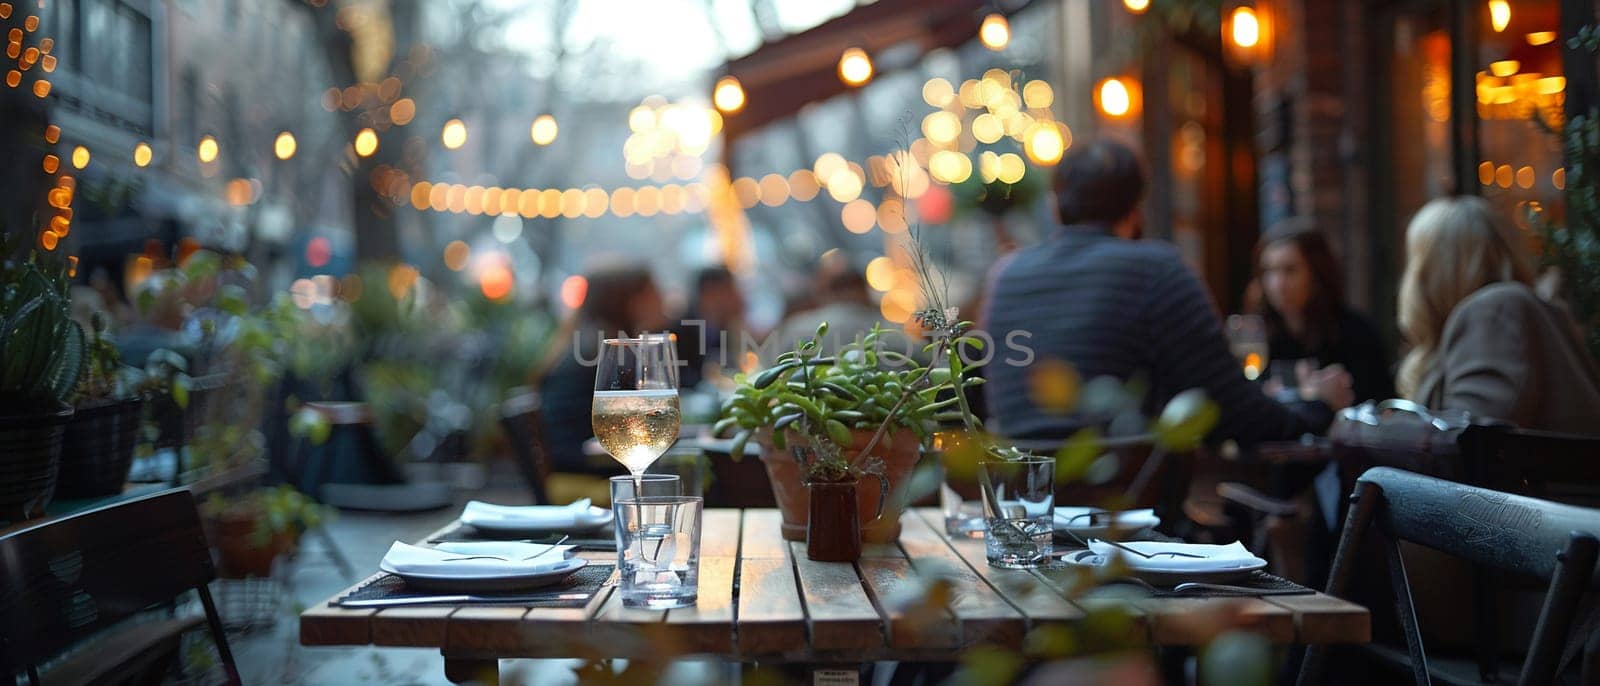 Chic Bistro Patio with Patrons Enjoying Alfresco Dining, The blurred ambiance of outdoor dining evokes a sense of casual urban sophistication.